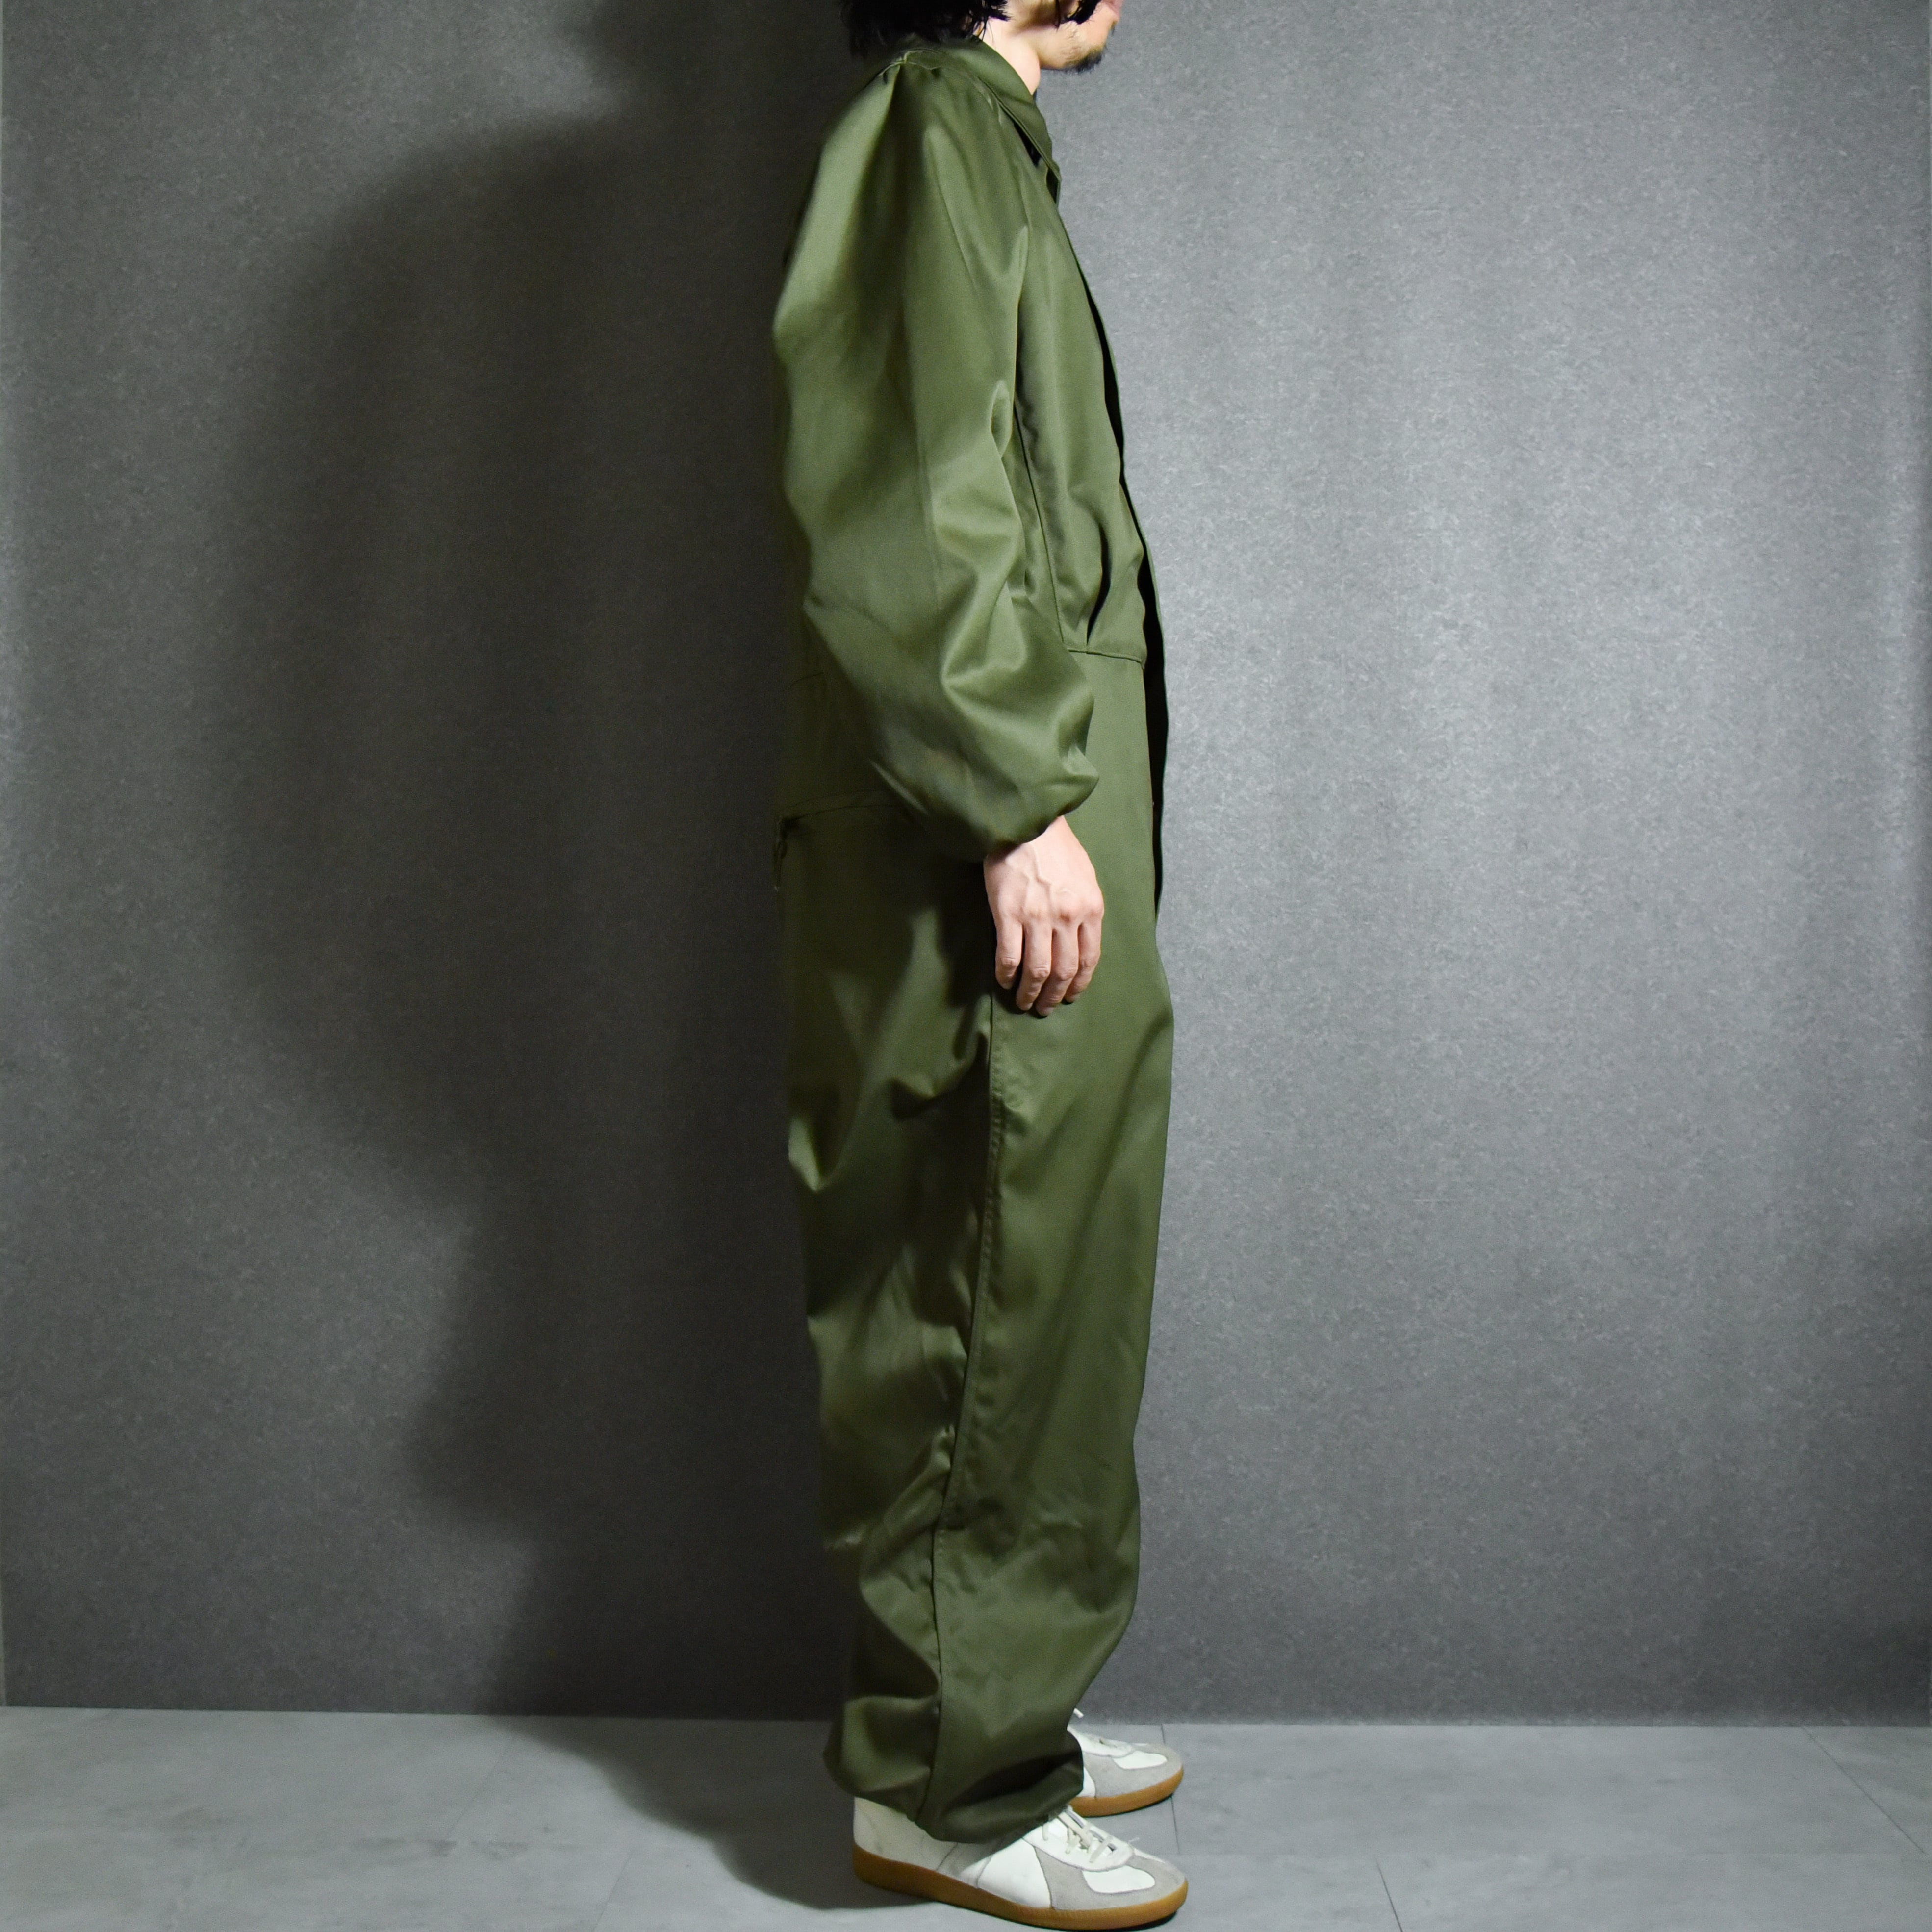 DEAD STOCK】US Army Mechanic Jamp Suit アメリカ軍 メカニック ...